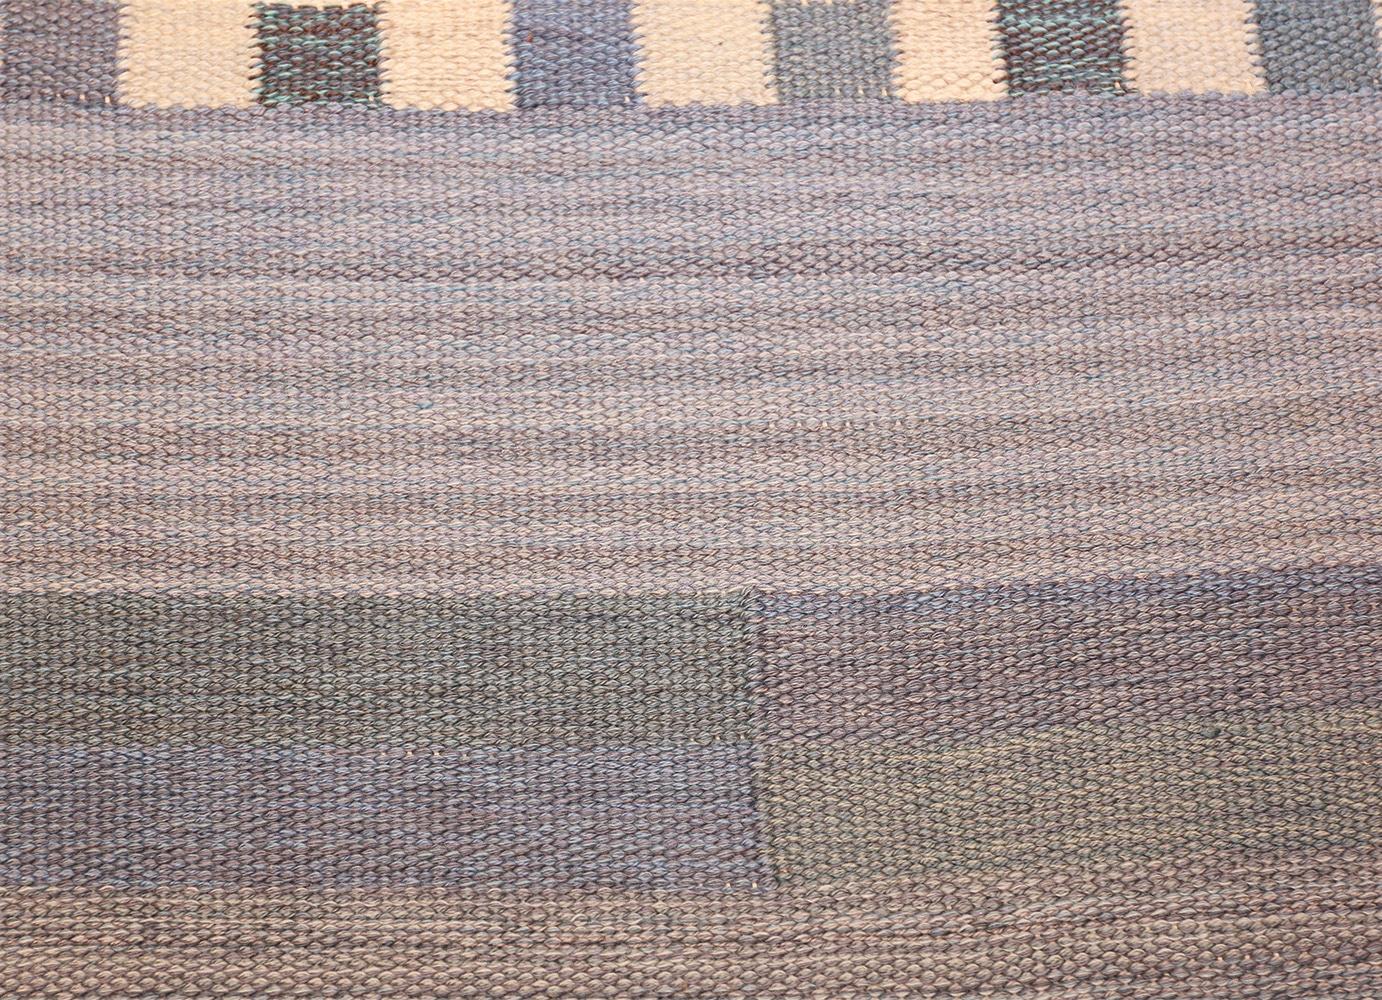 Beautiful Square Size Vintage “Fasad” Marta Maas Swedish Kilim Rug by Marianne Richter, Country of Origin / Rug Type: Scandinavian Rugs, Circa date: 1950. Size: 7 ft 4 in x 7 ft 6 in (2.24 m x 2.29 m)

